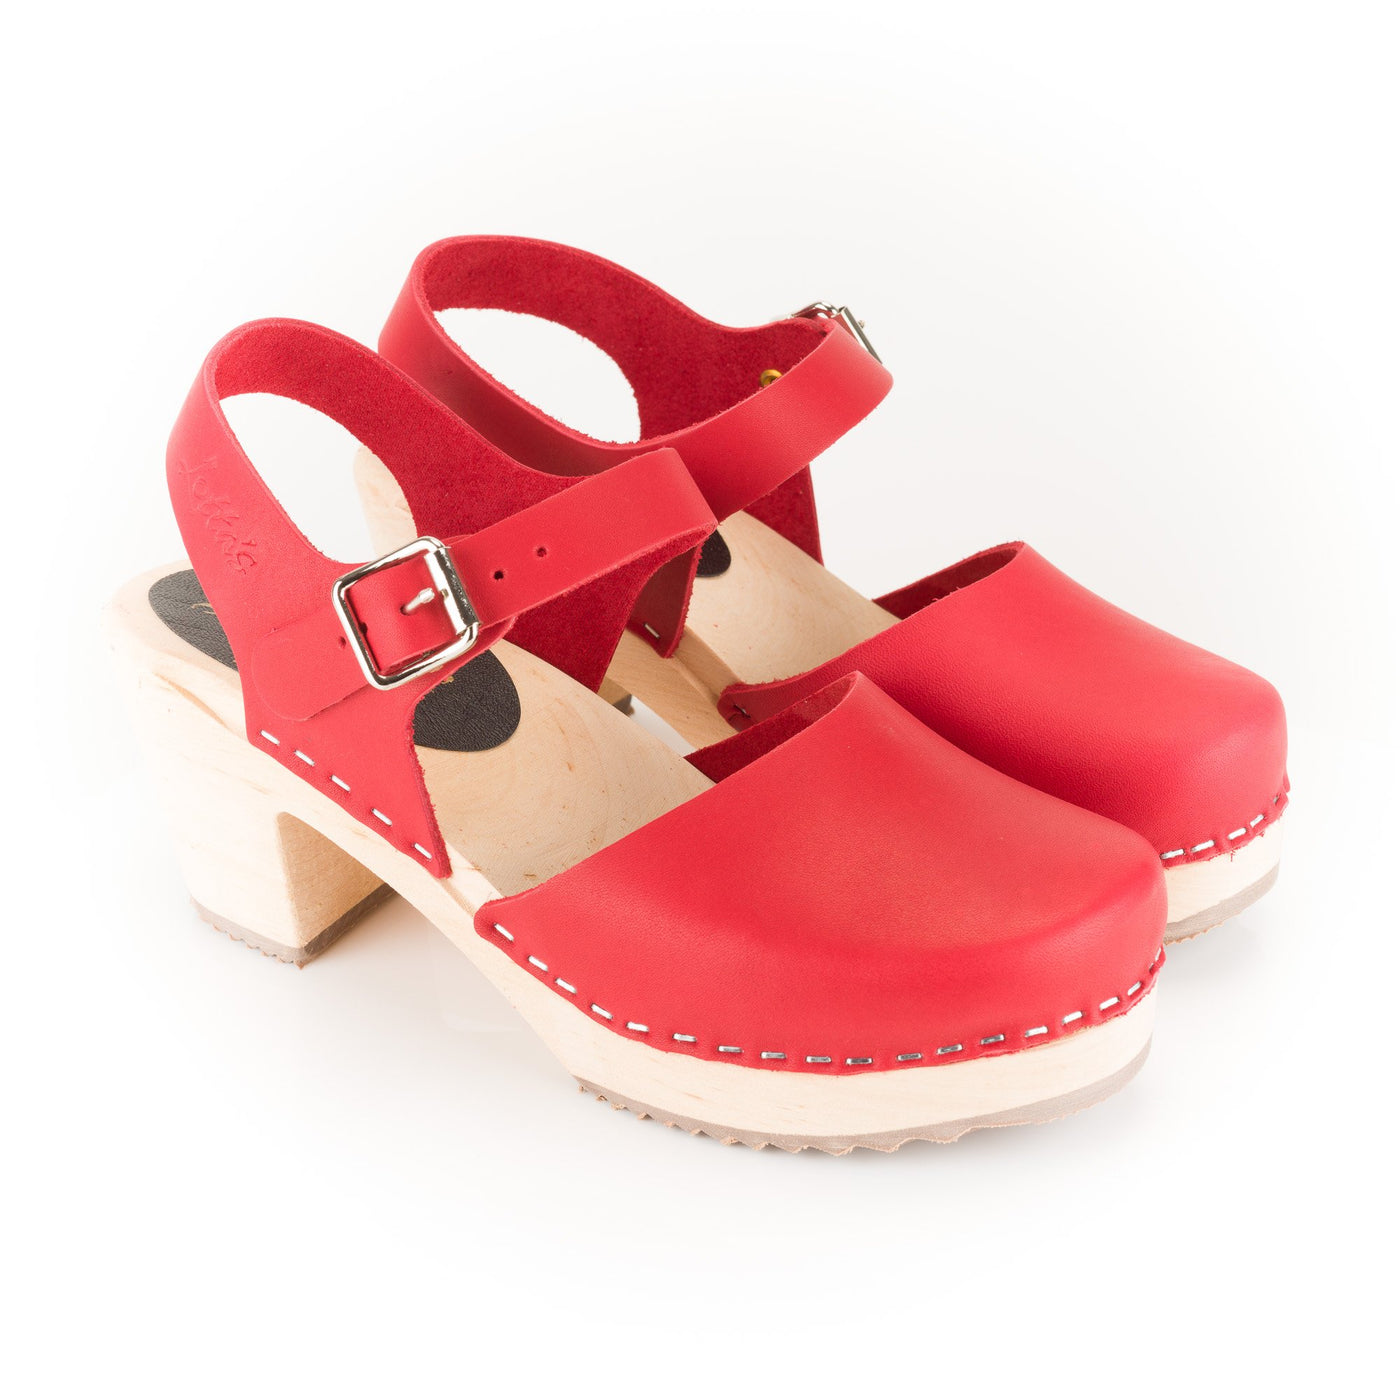 Red Wooden Clogs | Covered Toe Clogs | Lotta from Stockholm – Dollydagger